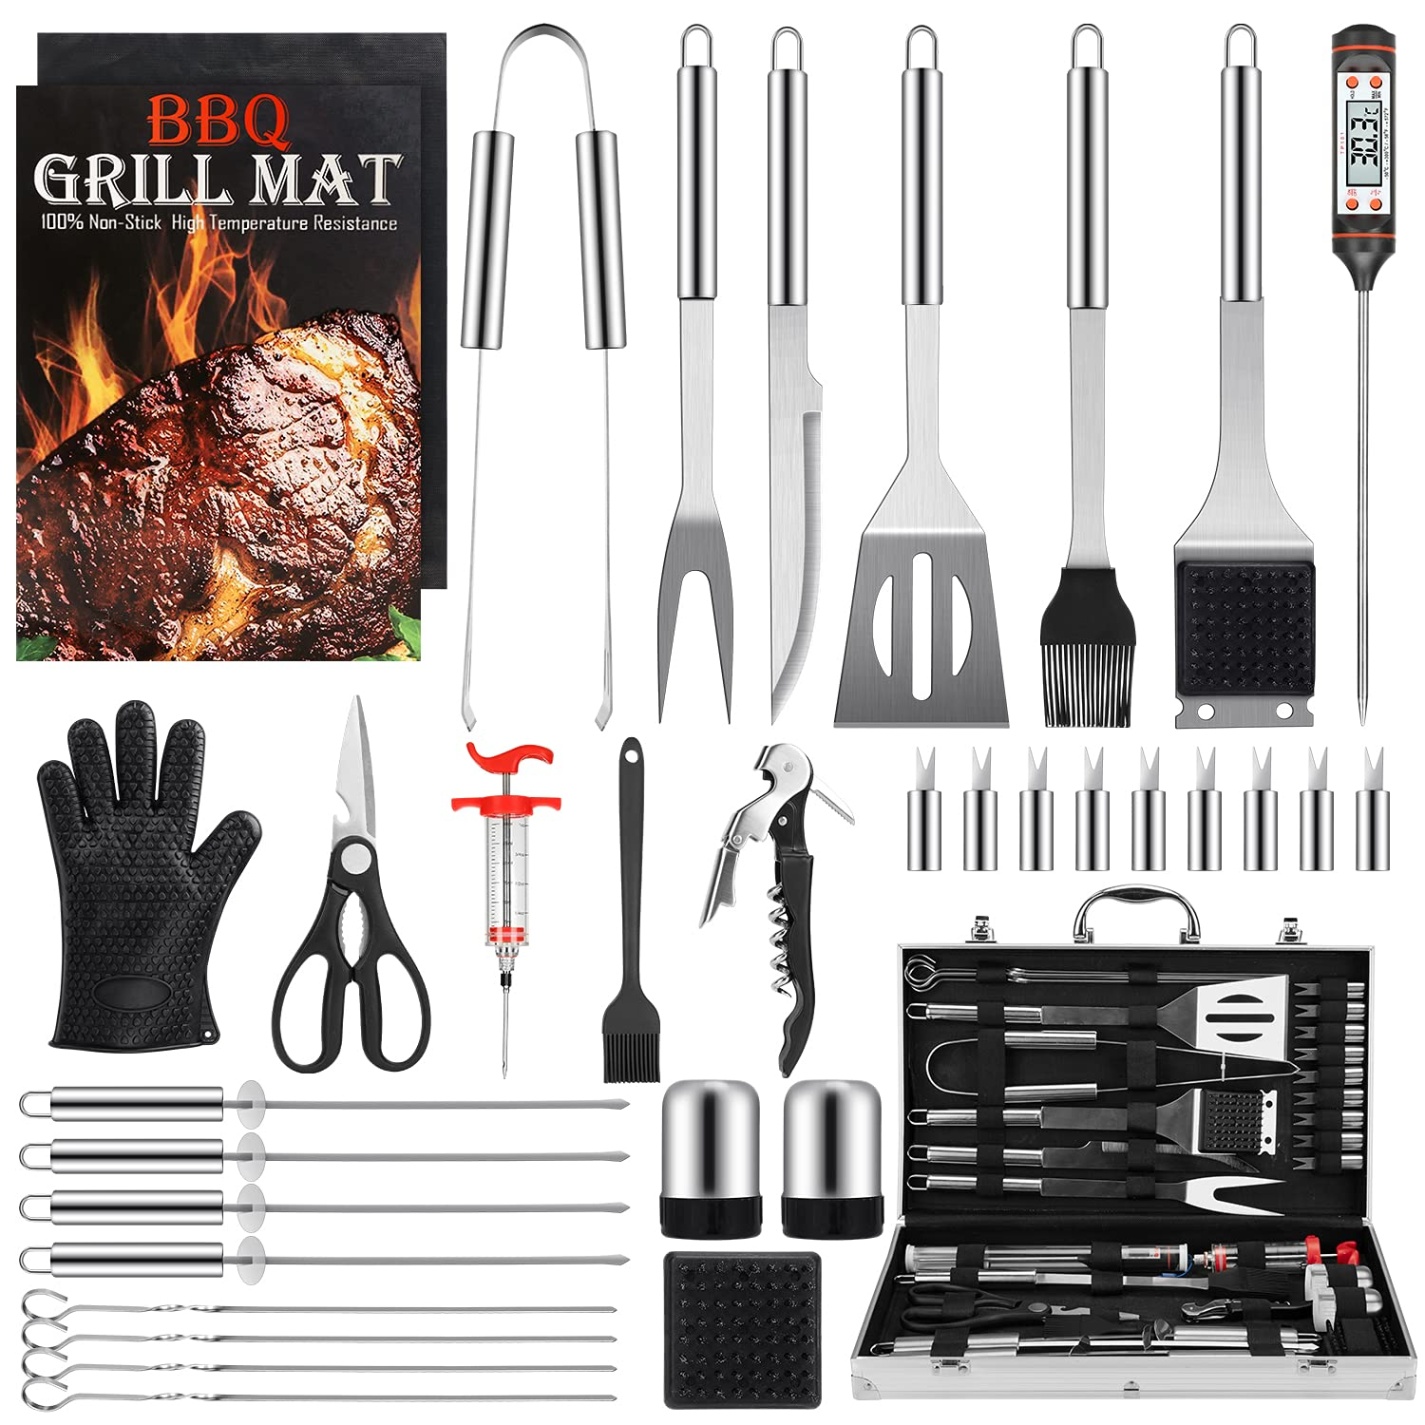 bbq accessories near me Niche Utama Home Grill Set BBQ Tools Grilling Tools Set Gifts for Men, PCS Stainless Steel  Grill Accessories with Aluminum Case,Thermometer, Grill Mats for